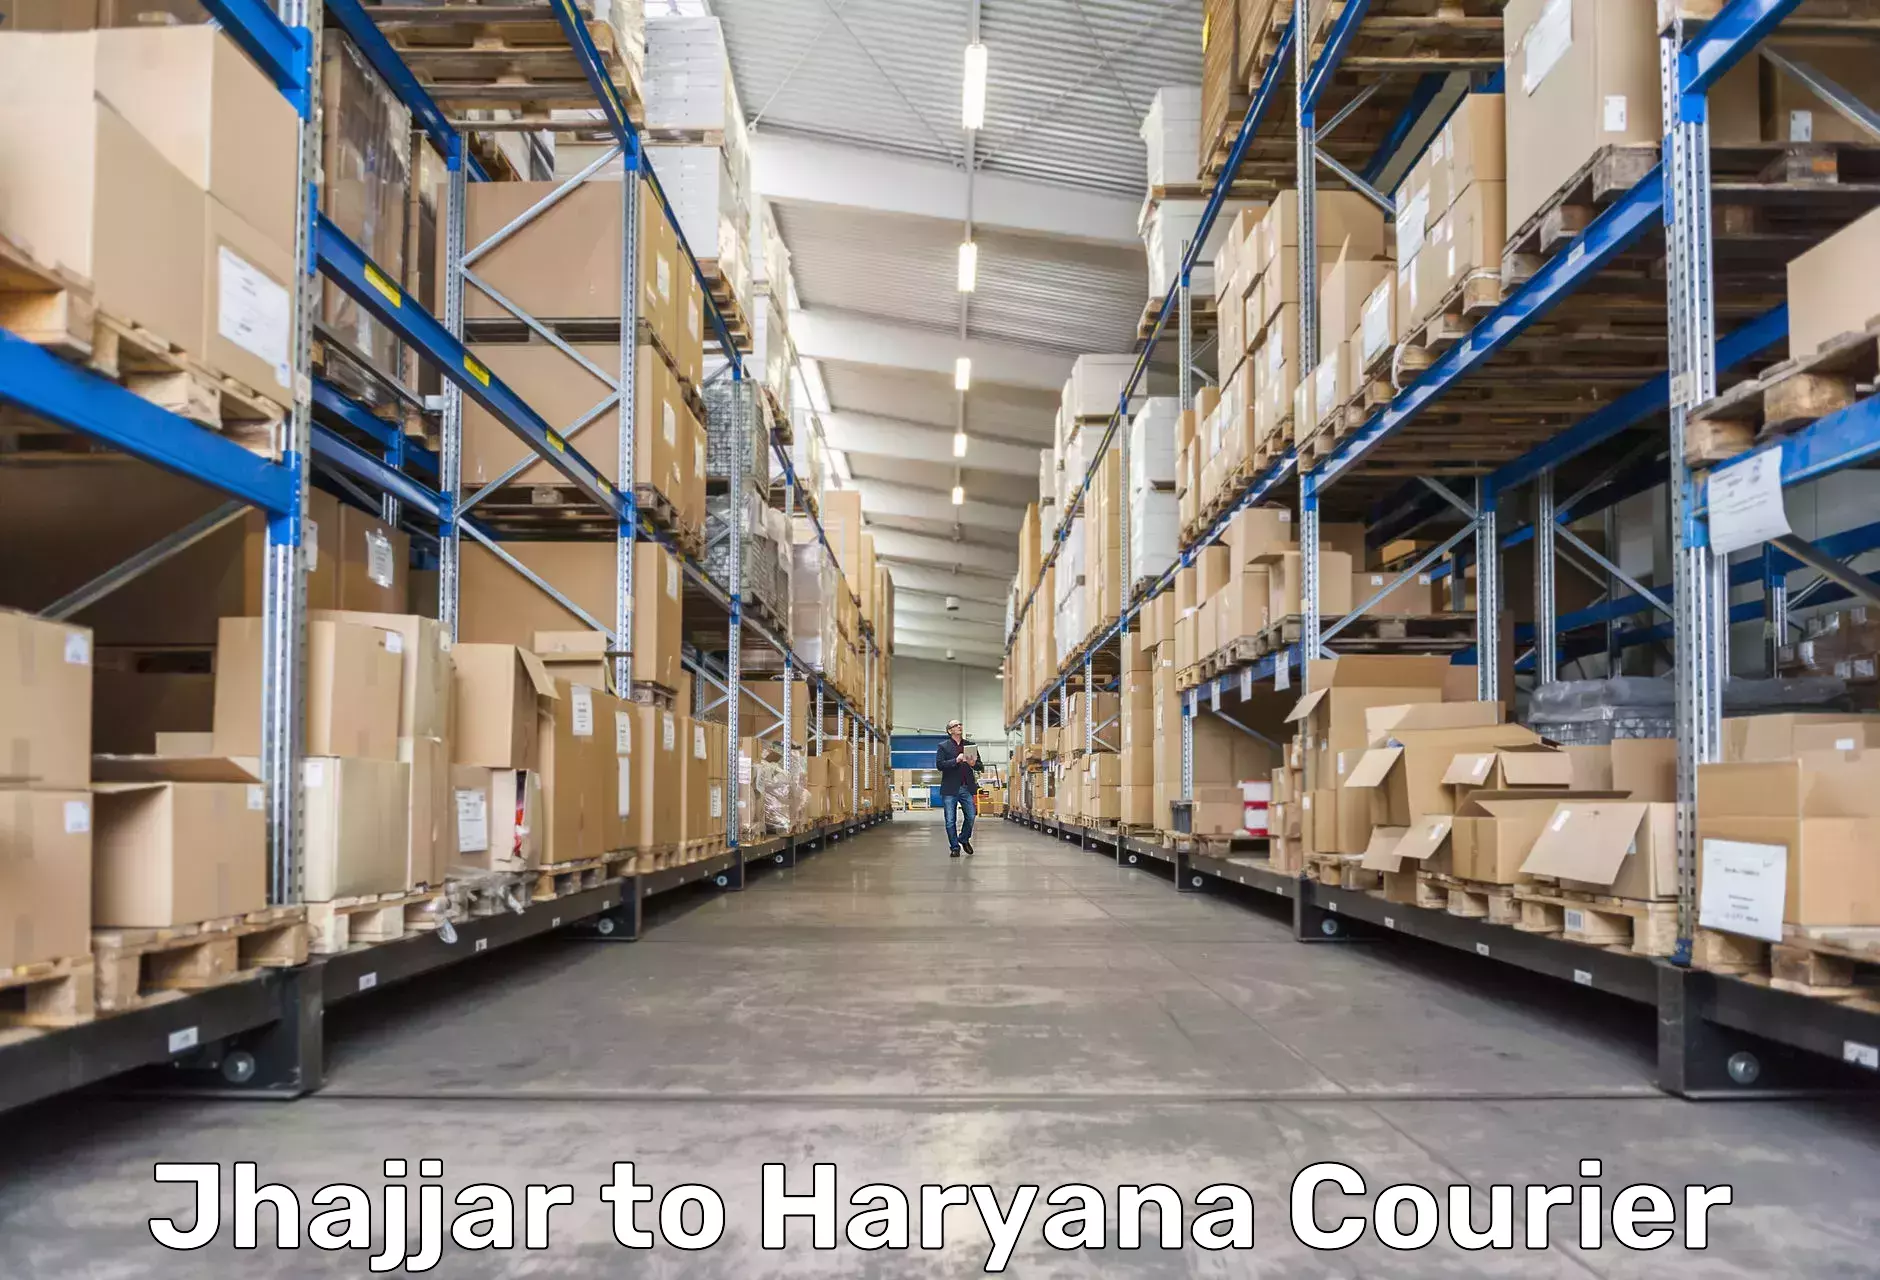 Courier tracking online in Jhajjar to Chaudhary Charan Singh Haryana Agricultural University Hisar